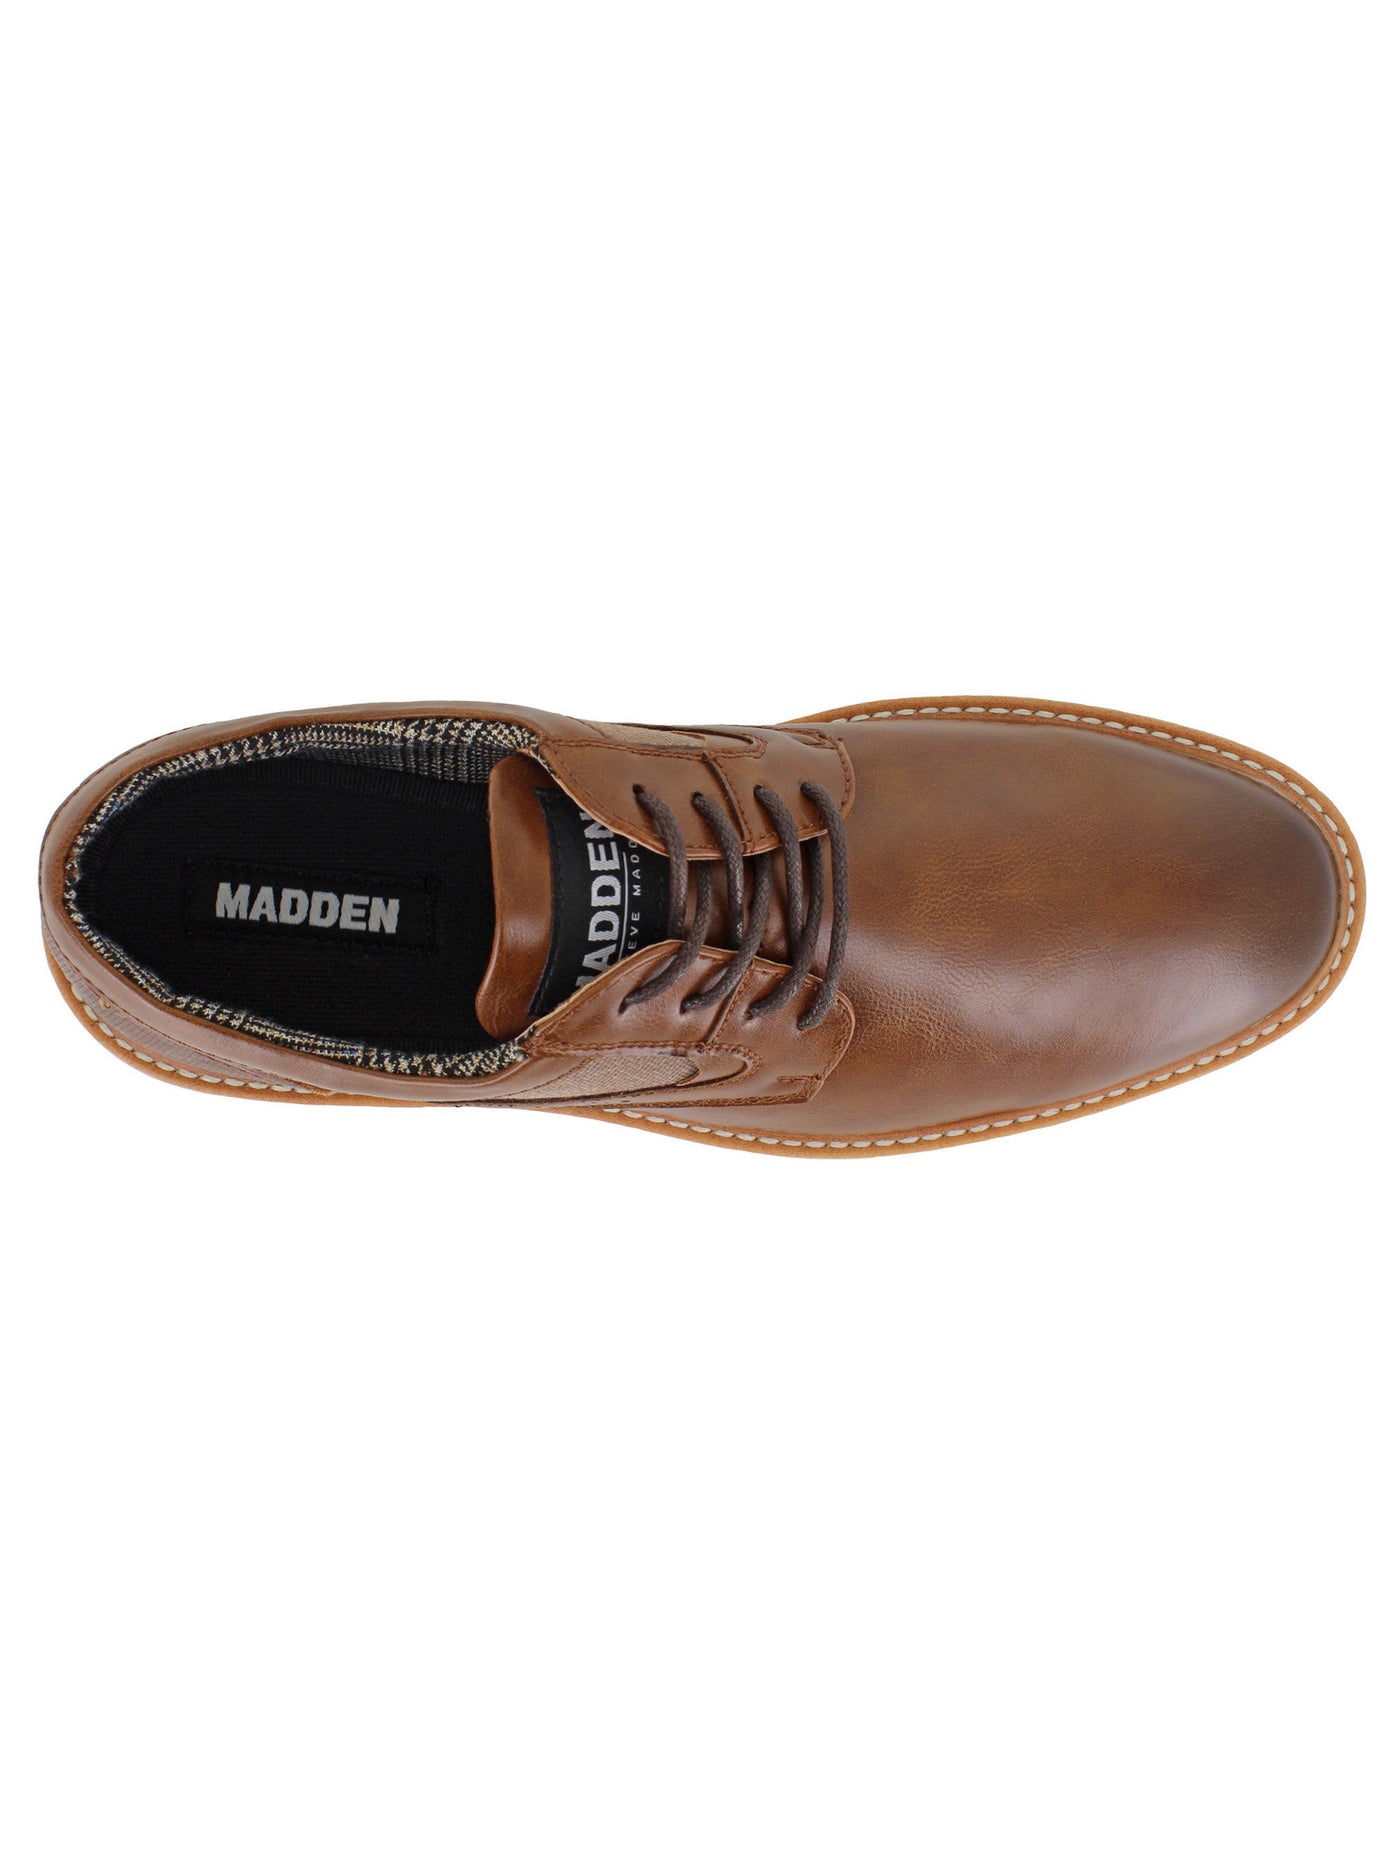 MADDEN Mens Brown Comfort Vypper Round Toe Lace-Up Dress Shoes